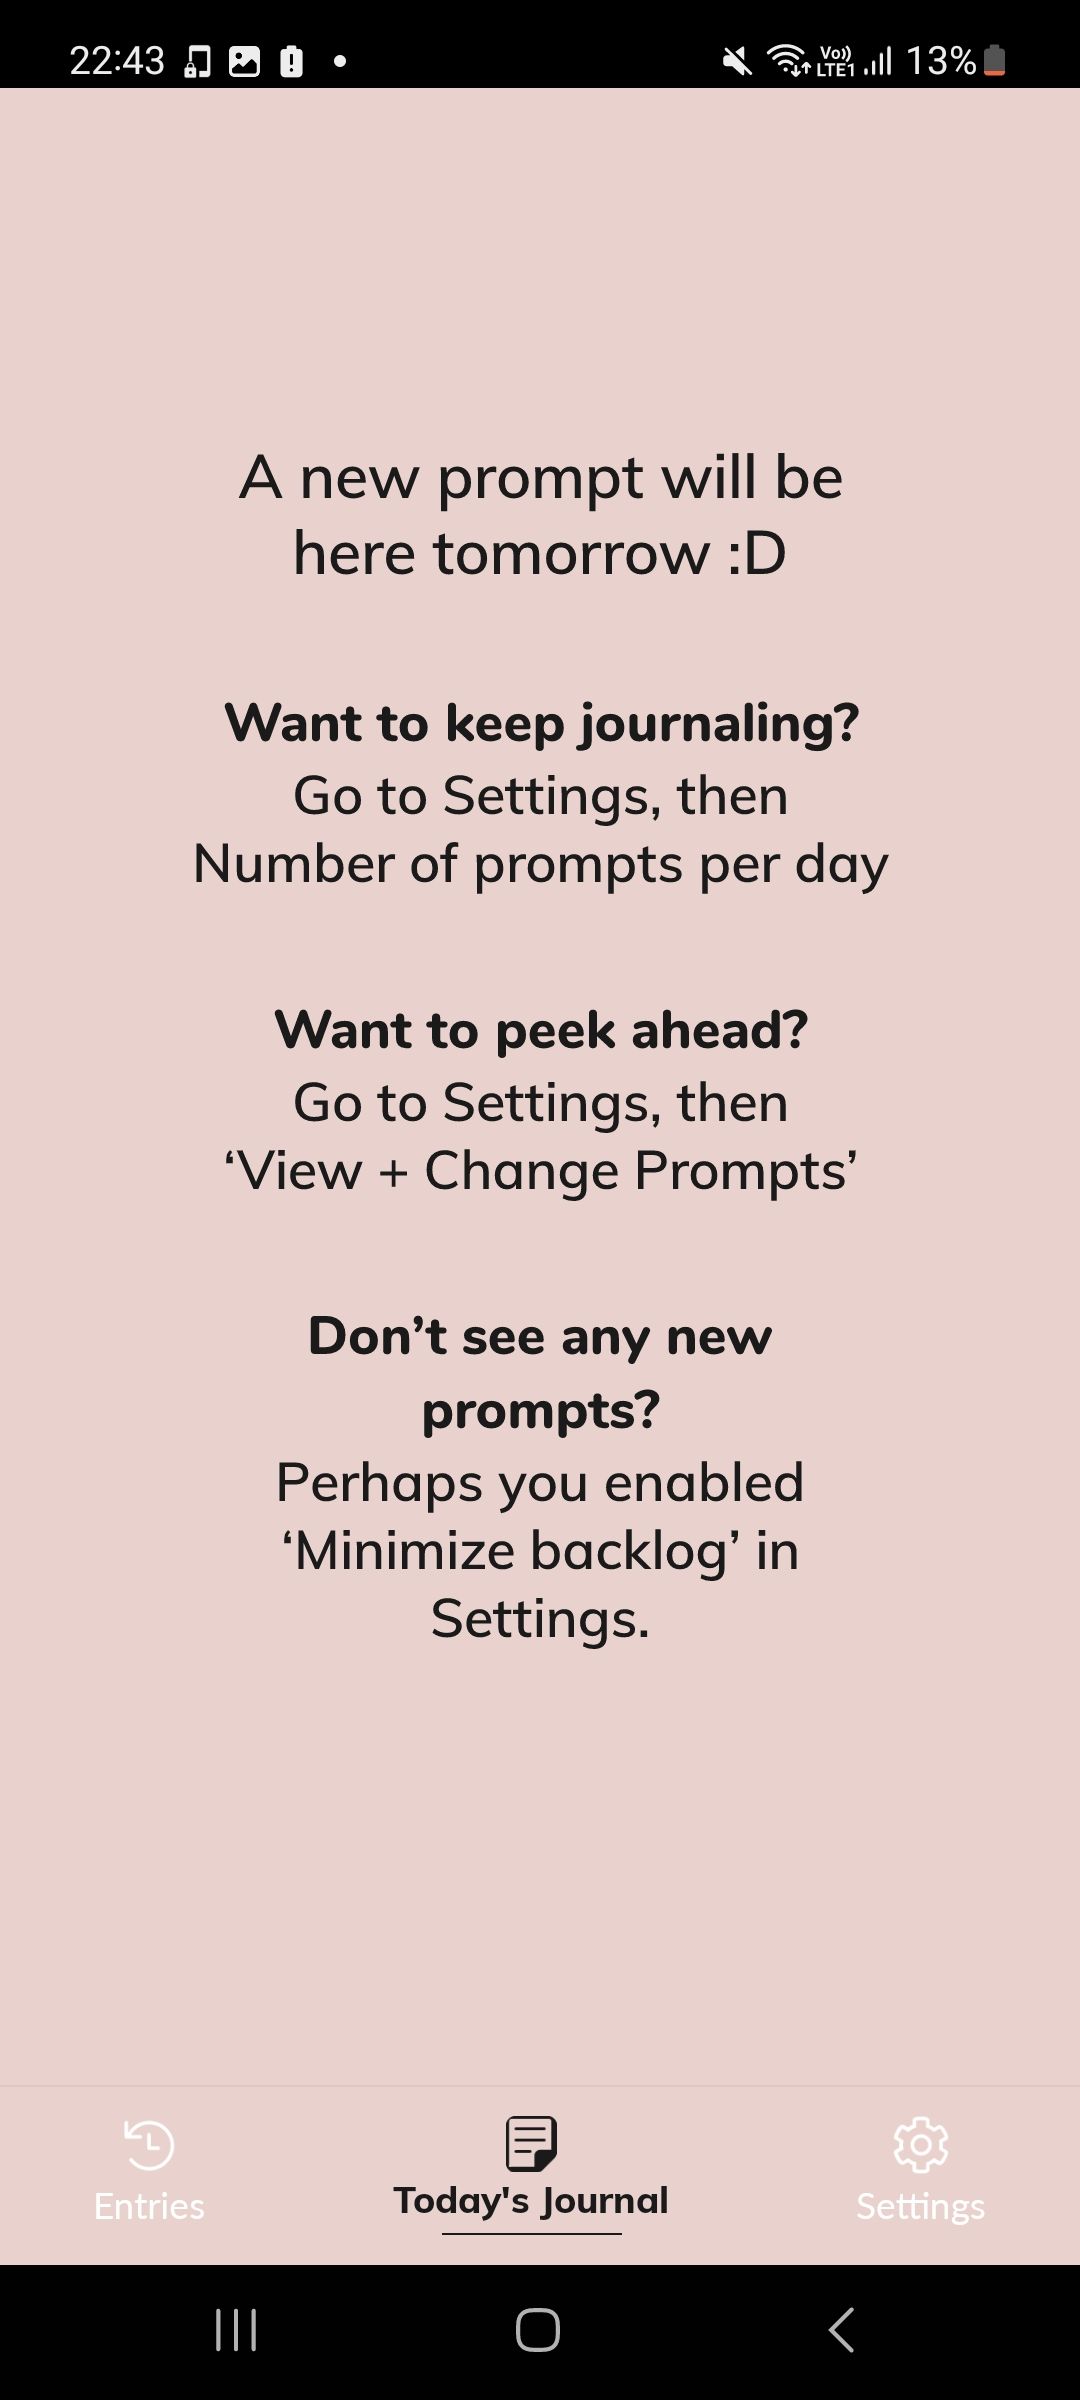 Extra options in Prompted Journal